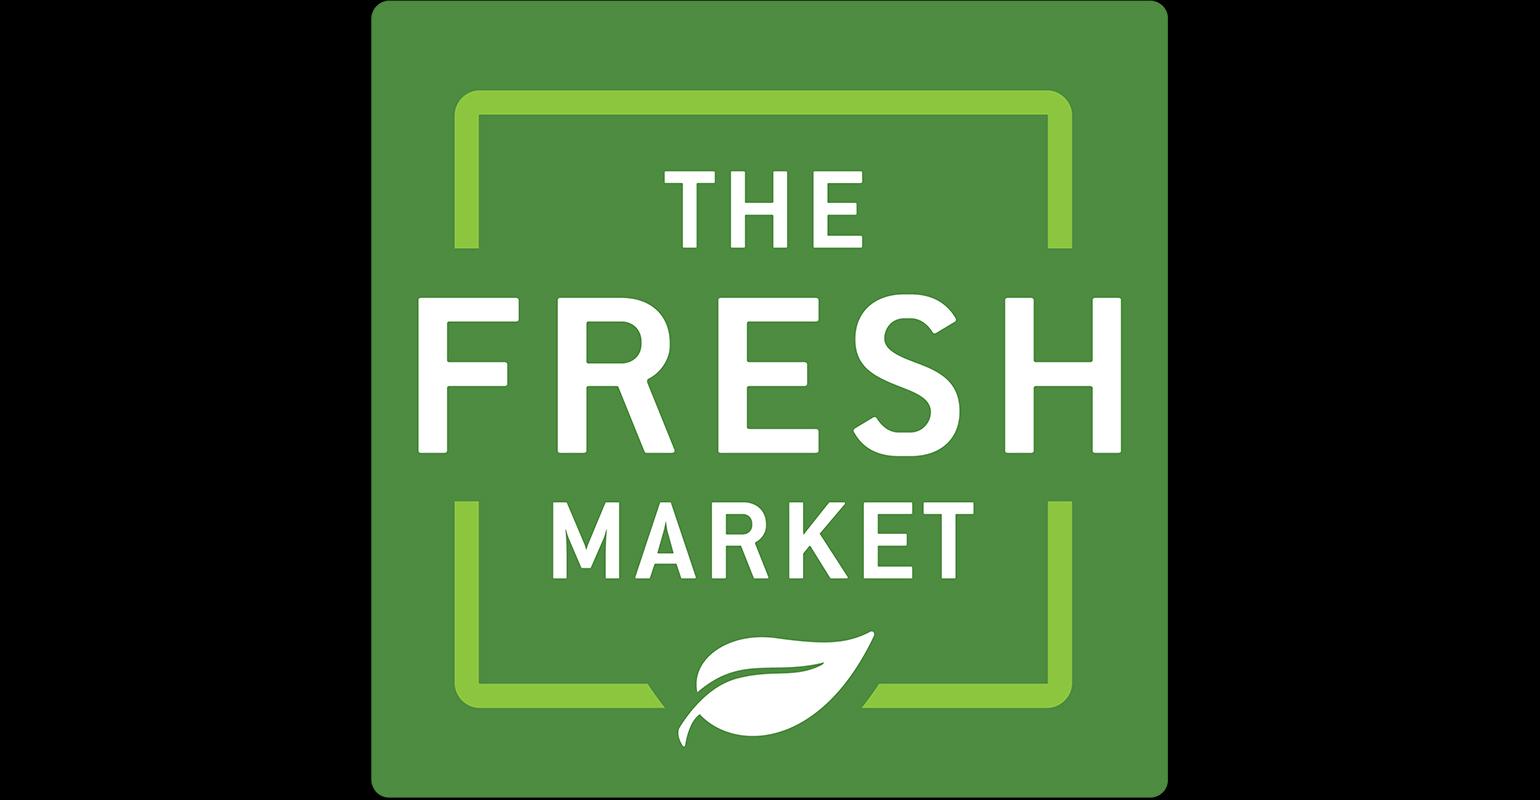 The Fresh Market Remakes Its Image Offering Supermarket News